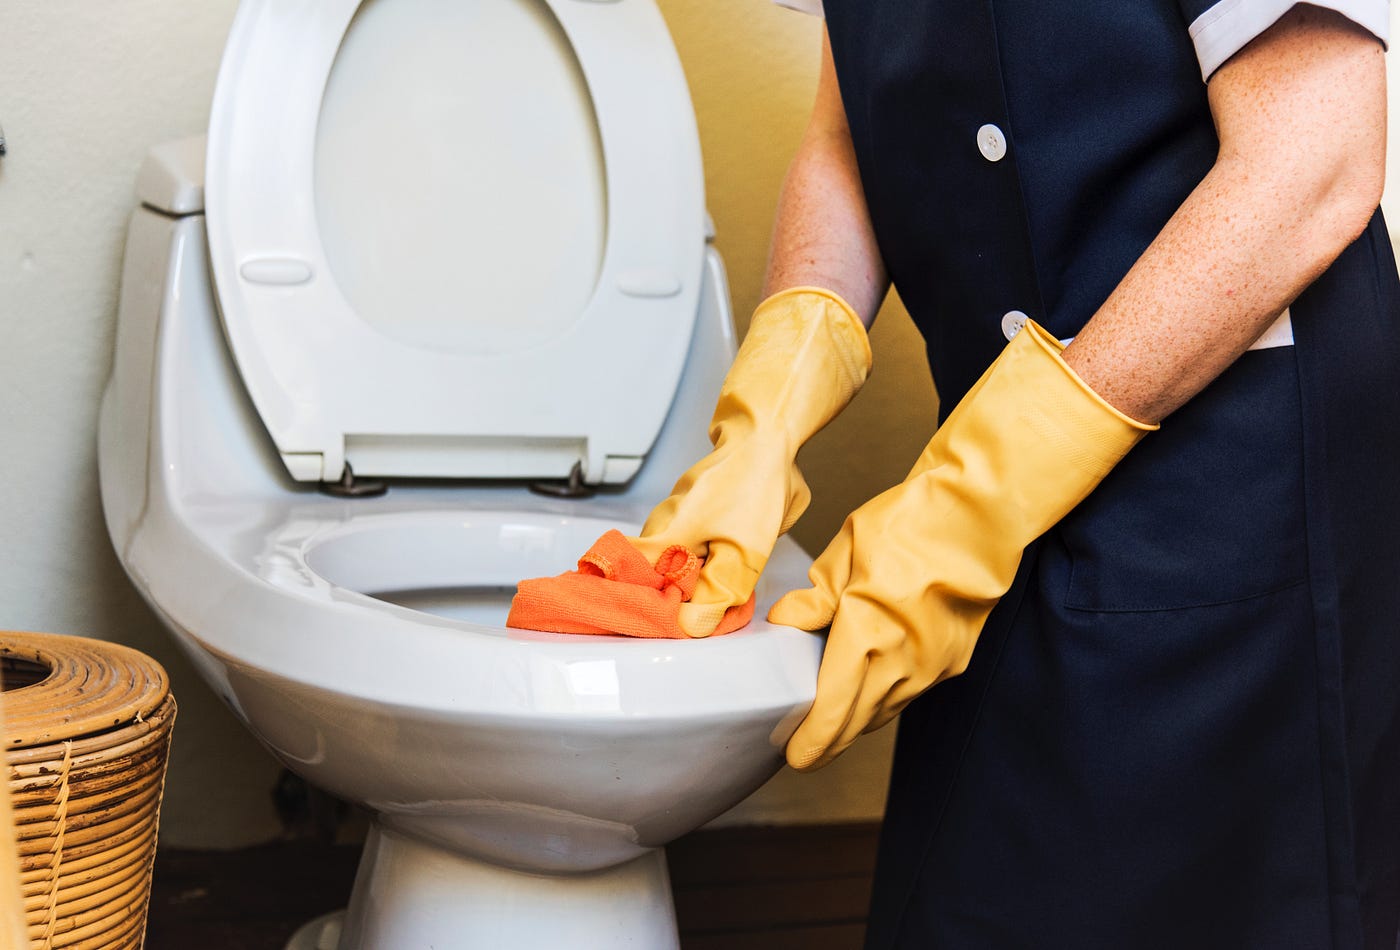 How To Get Rid Of The Brown Stain In Bottom Of Toilet Bowl